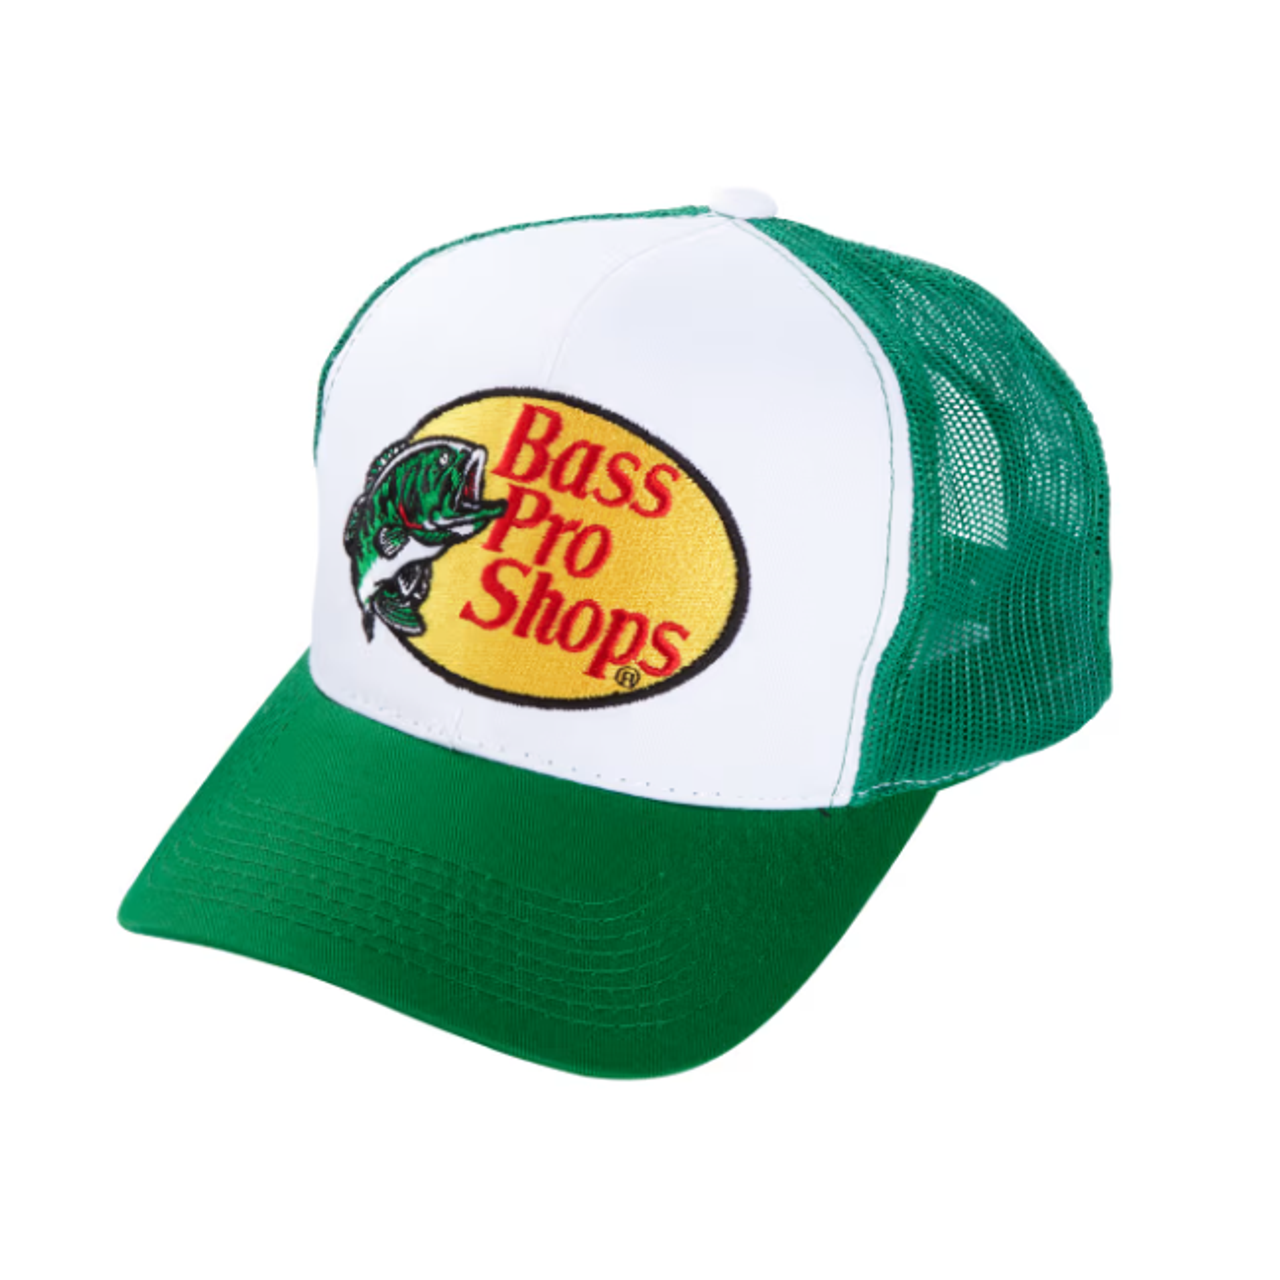 Bass Pro Shops Embroidered Logo Mesh Cap - Green/White - Boaters World